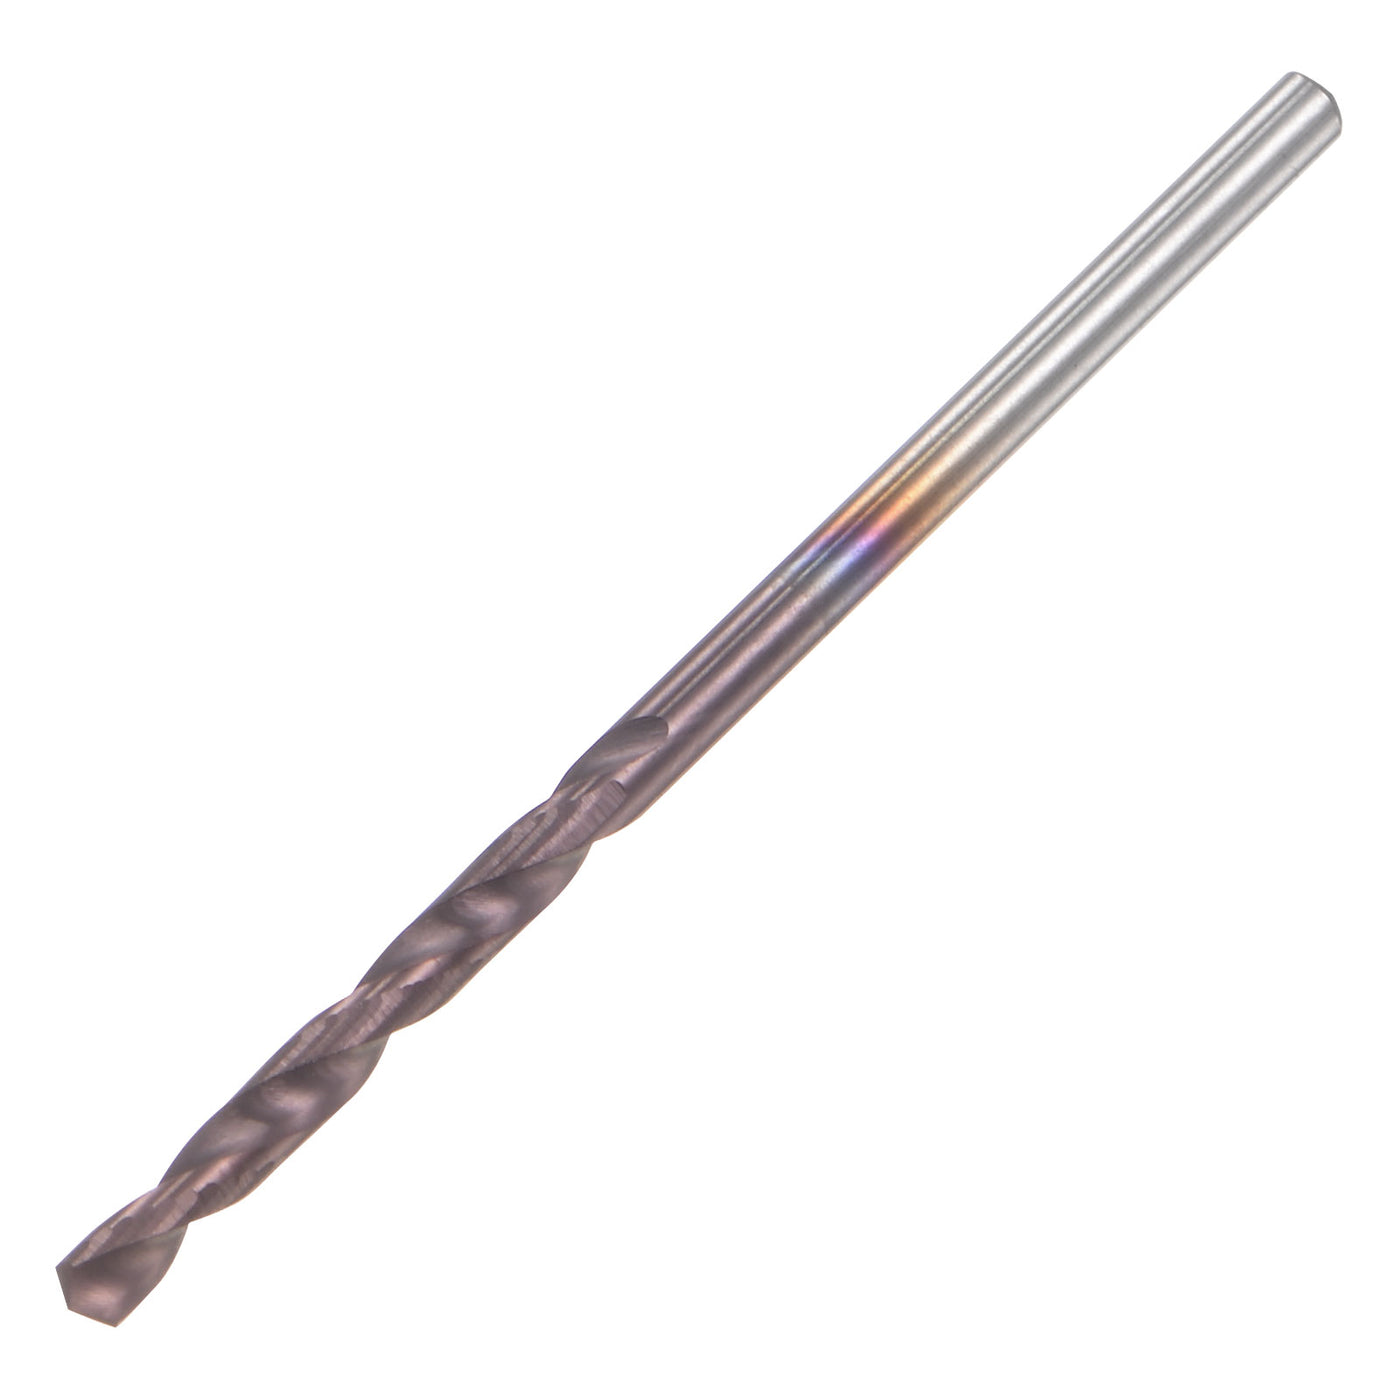 uxcell Uxcell 1.9mm DIN K45 Tungsten Carbide AlTiSin Coated Drill Bit for Stainless Steel